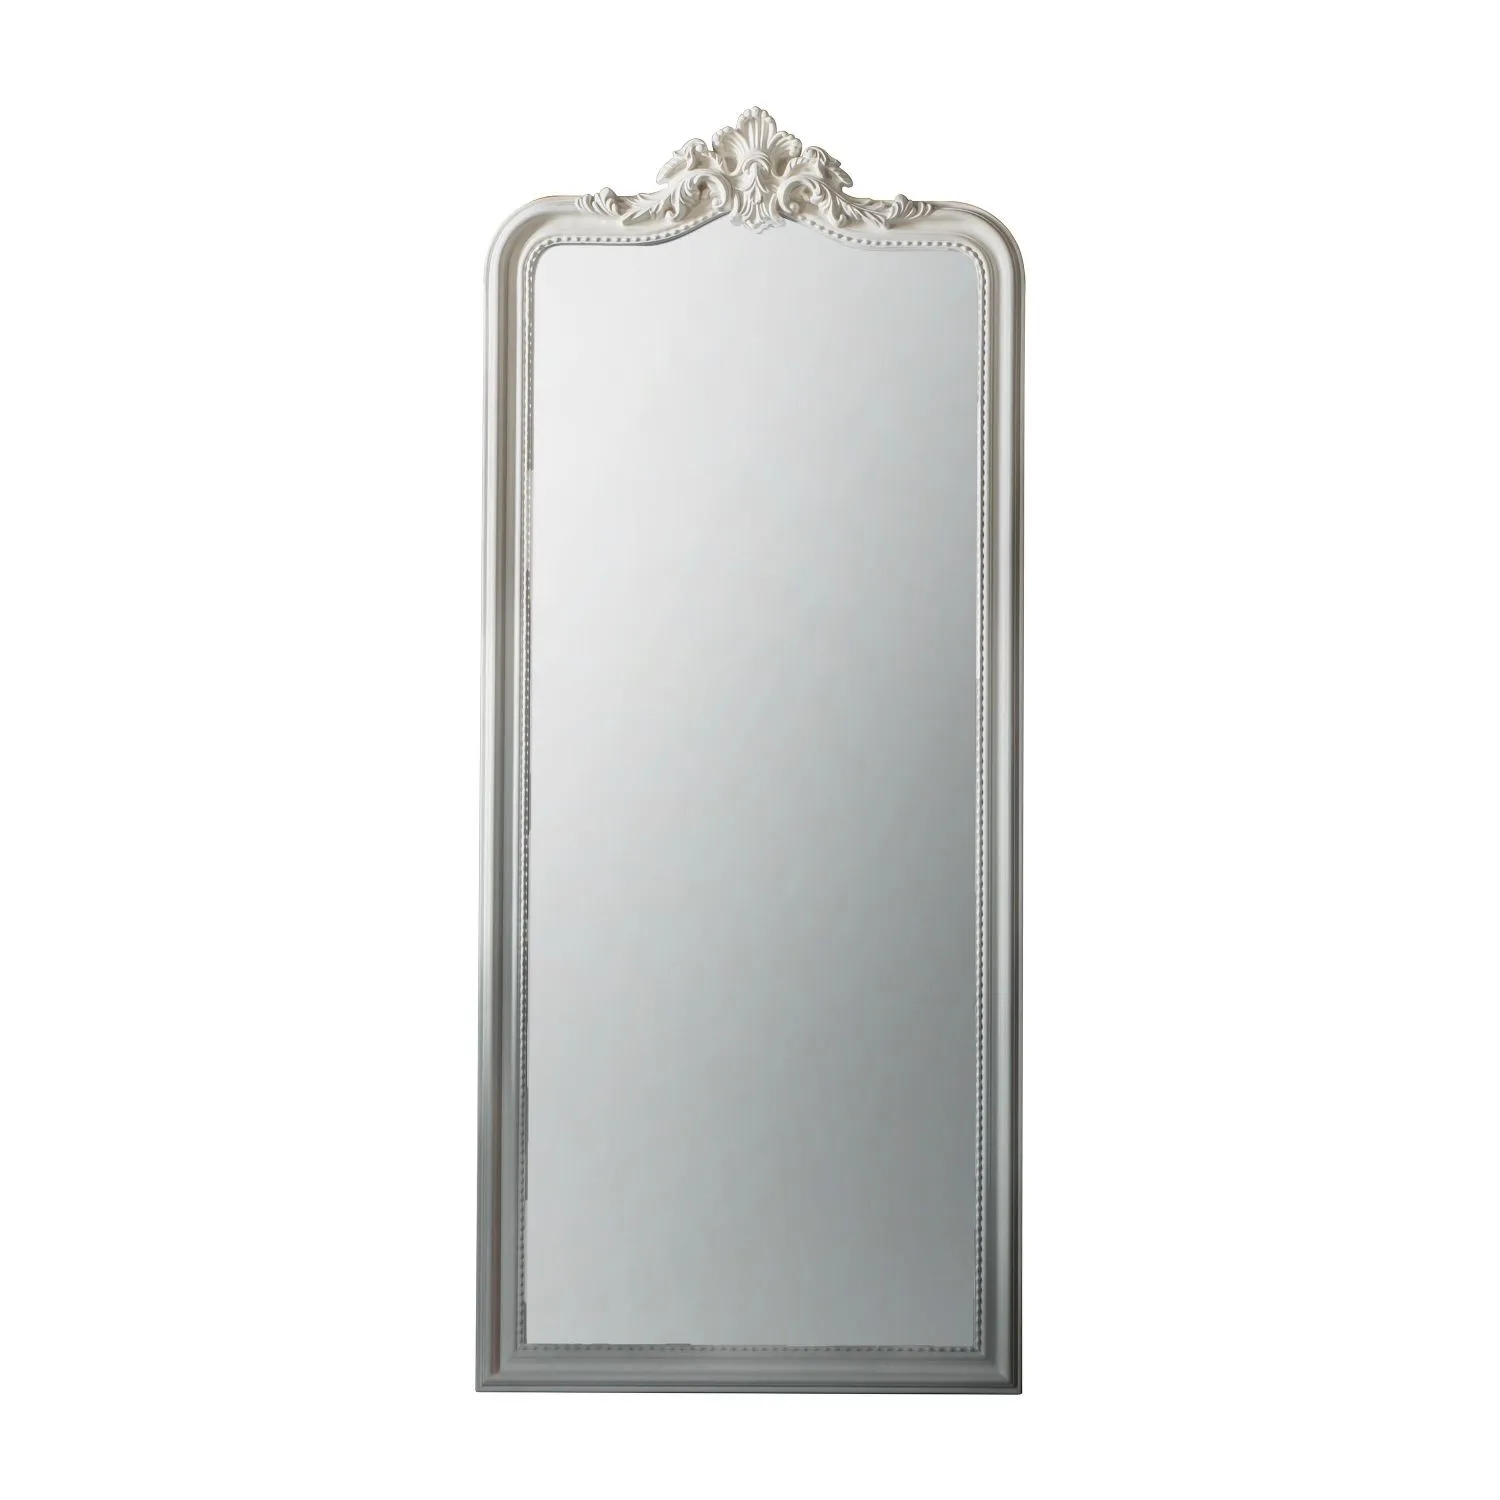 French White Tall Ornate Crown Leaner Wall Mirror